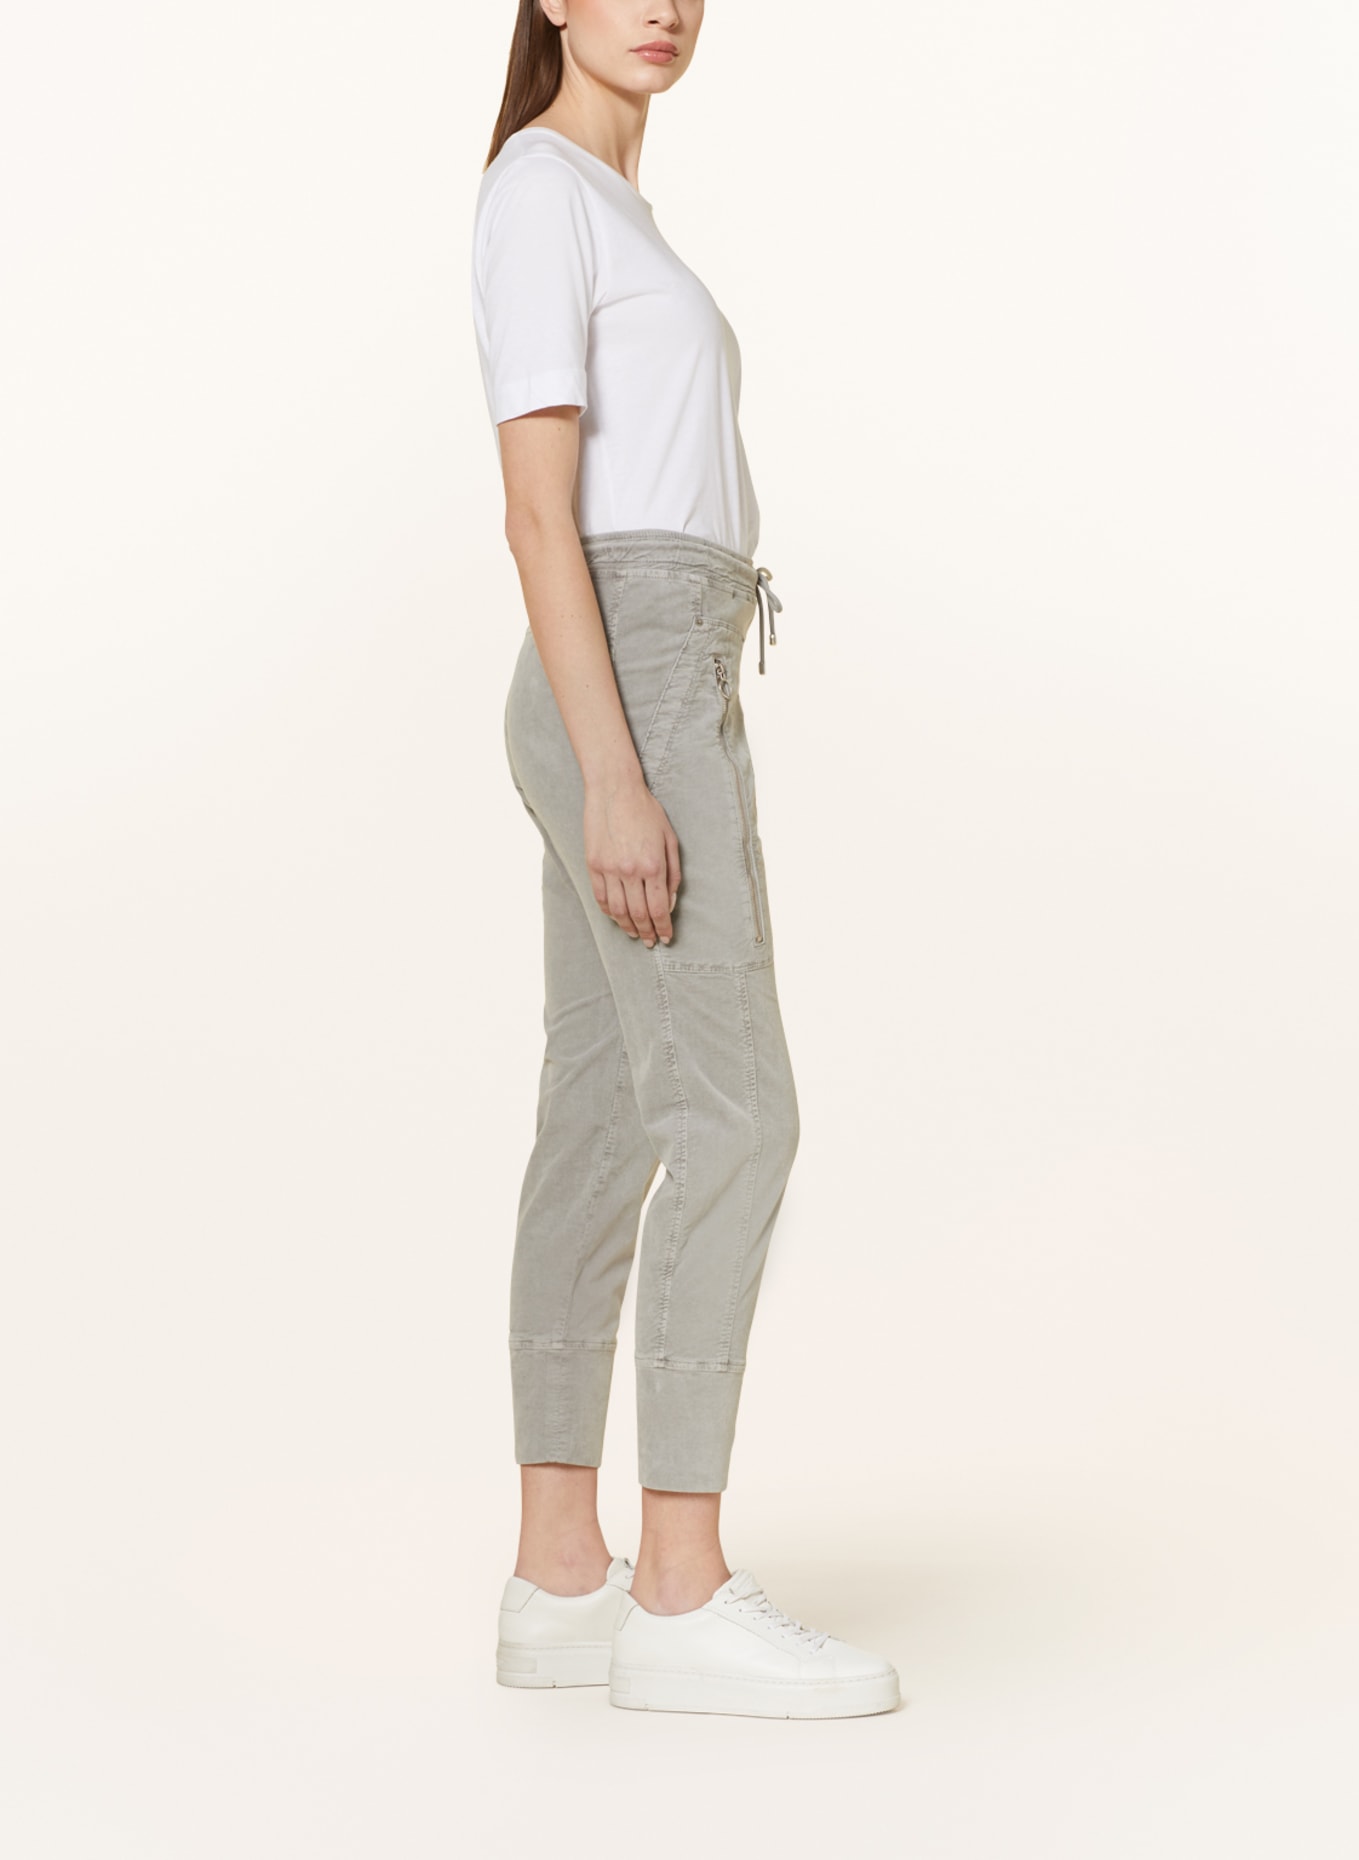 MAC 7/8 corduroy pants FUTURE in jogger style, Color: LIGHT GRAY (Image 4)